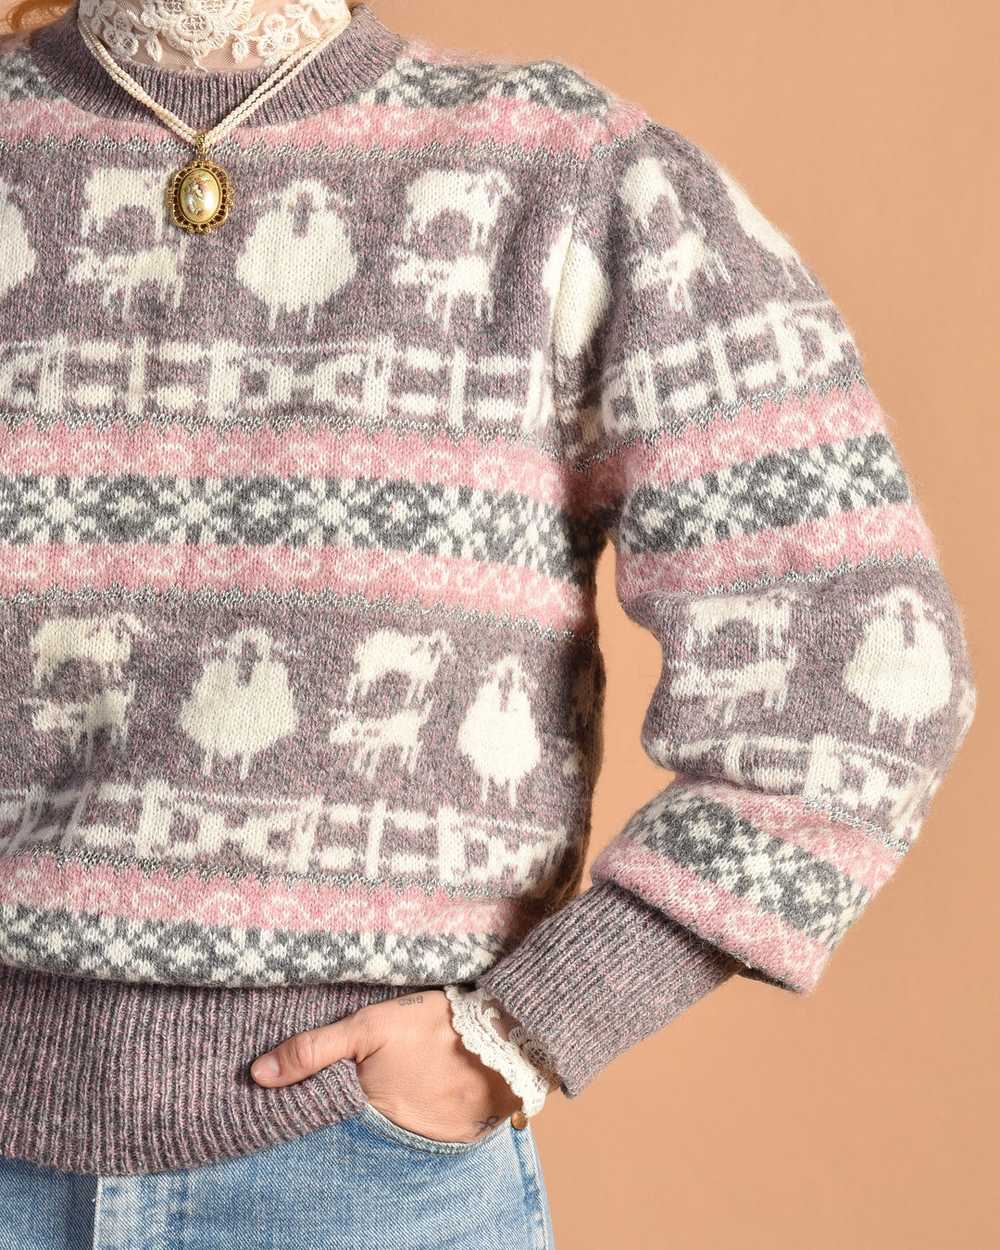 Dorian 1980s Sparkly Wool Sheep Sweater - image 3